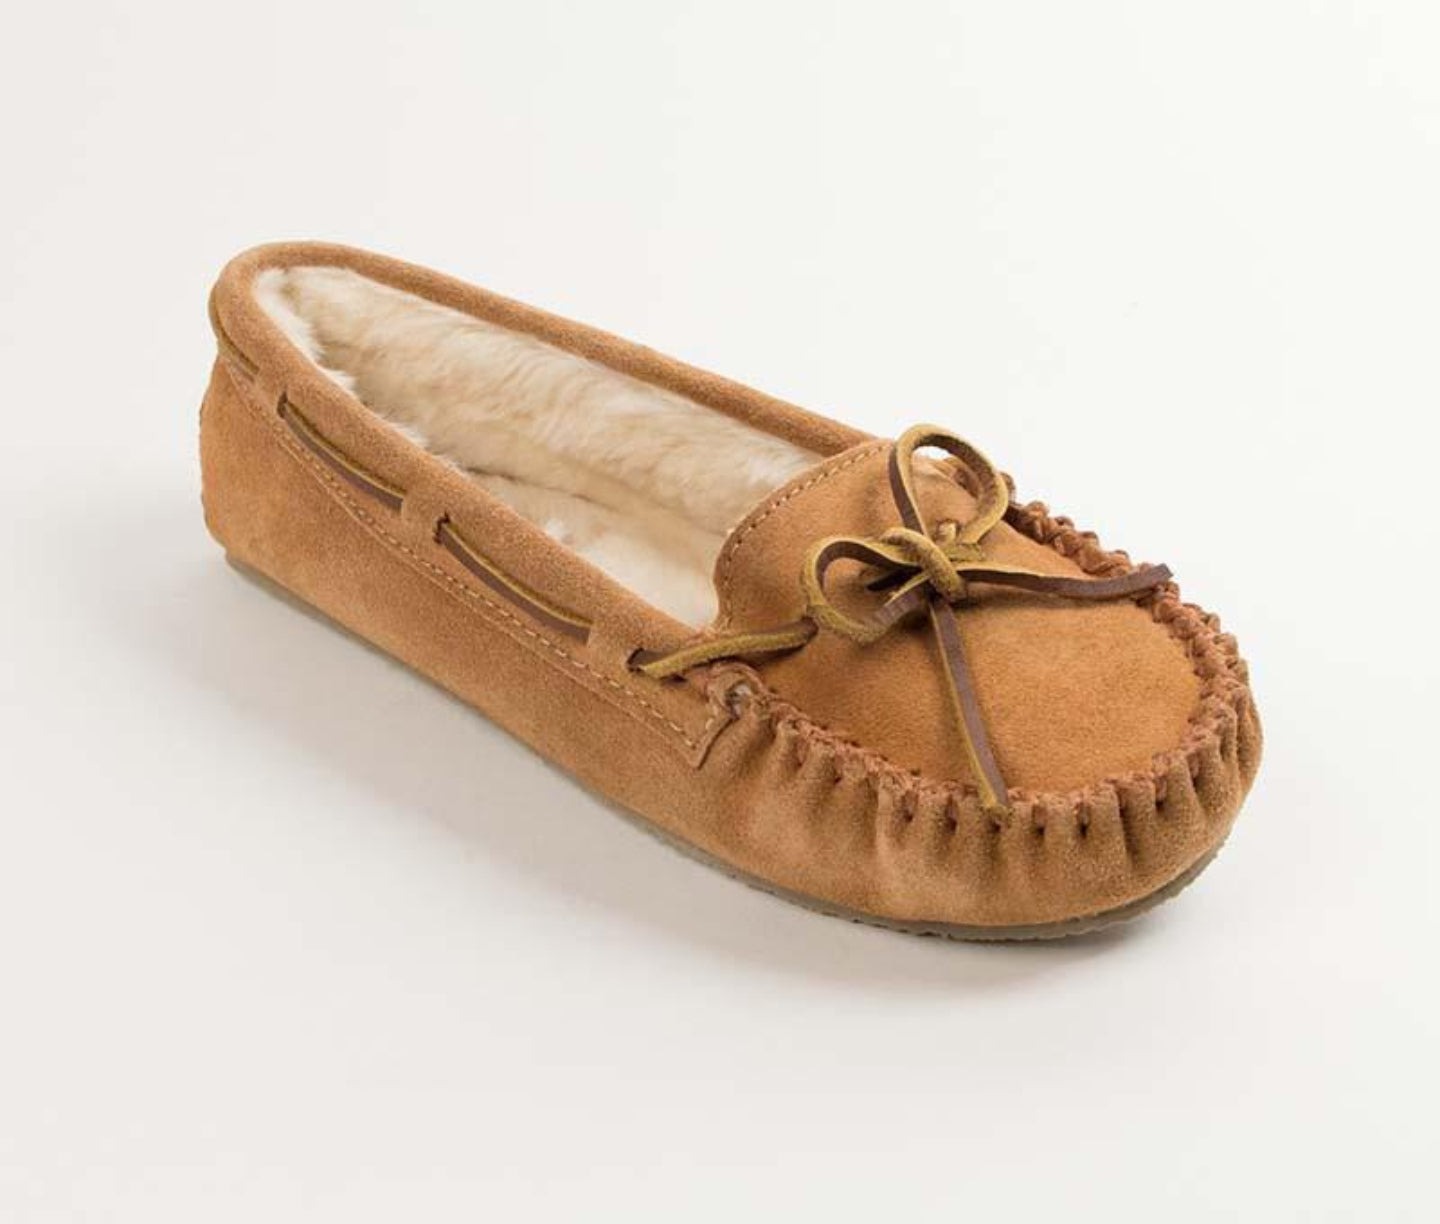 Cally Slipper in Cinnamon from 3/4 Angle View